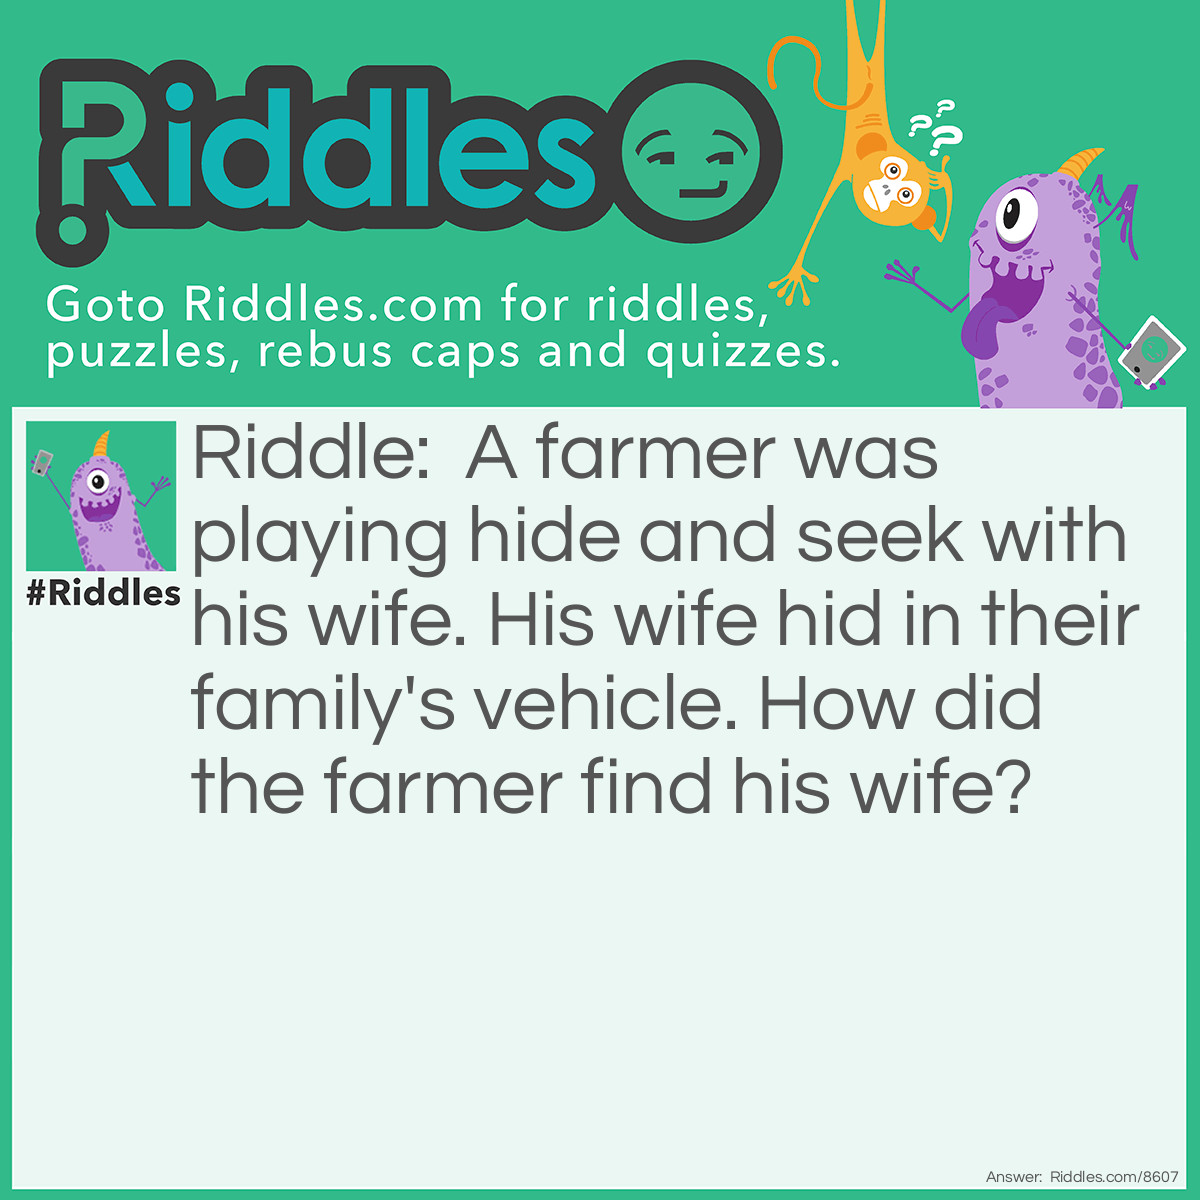 Riddle: A farmer was playing hide and seek with his wife. His wife hid in their family's vehicle. How did the farmer find his wife? Answer: He tractor down! (TRACKED HER down)